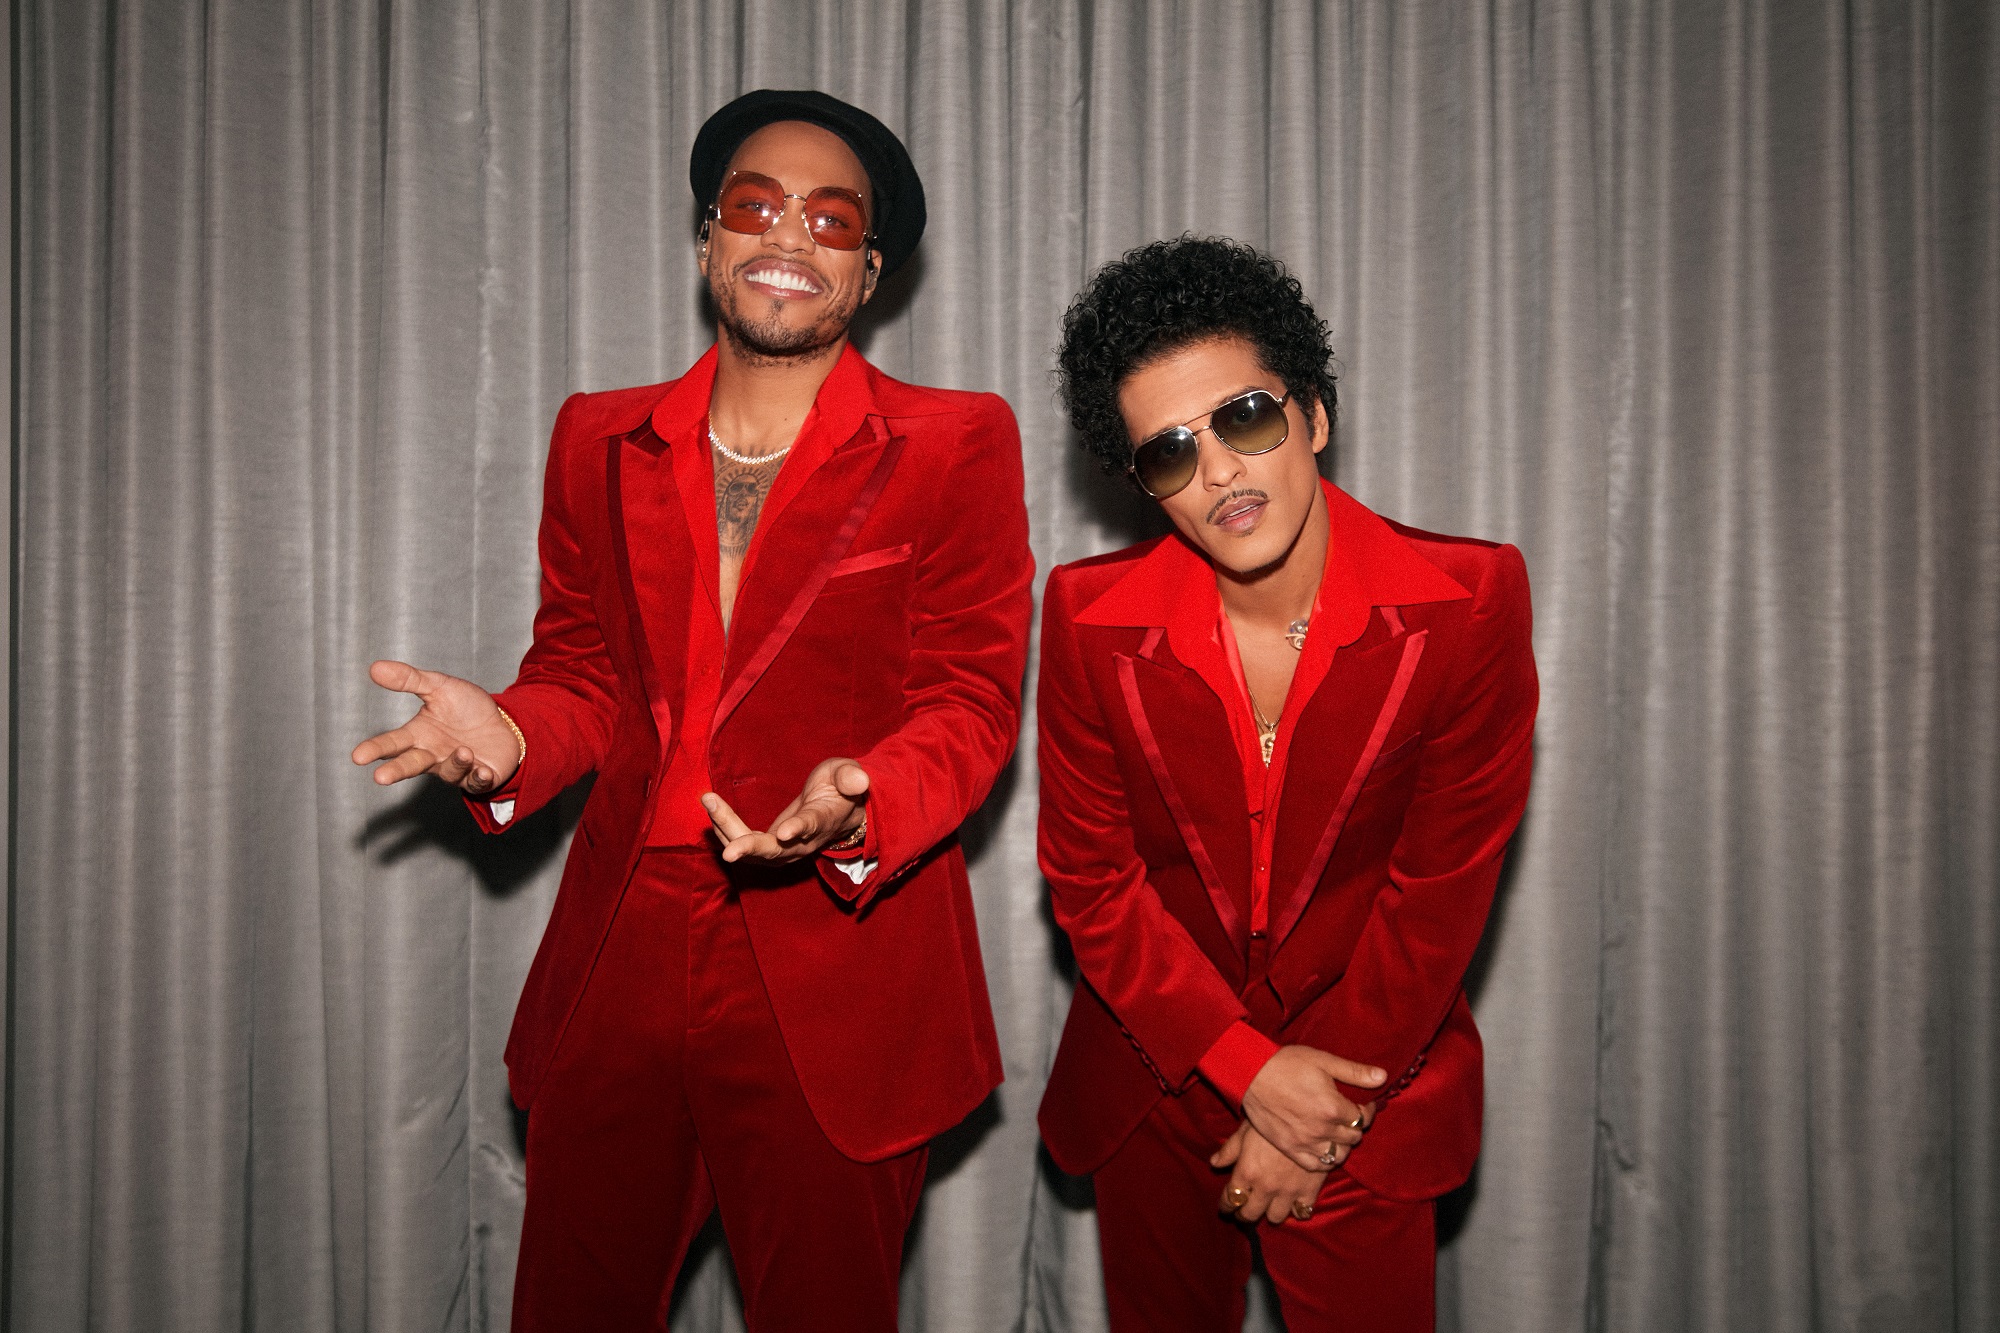 Anderson .Paak and Bruno Mars of Silk Sonic backstage at the 2021 American Music Awards